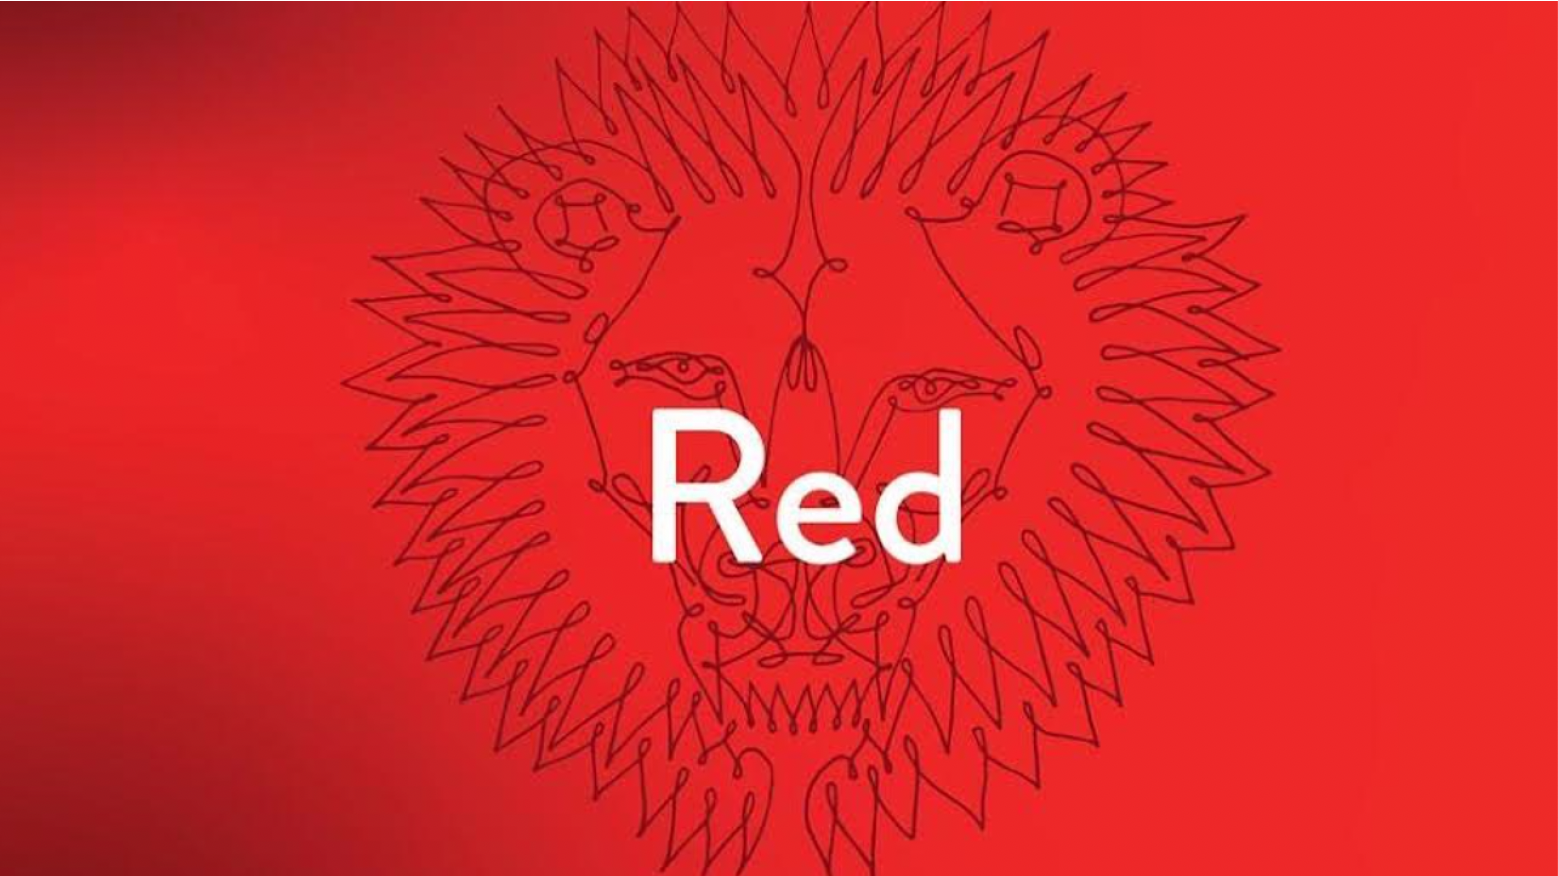 INTRODUCING THIN RED LION 